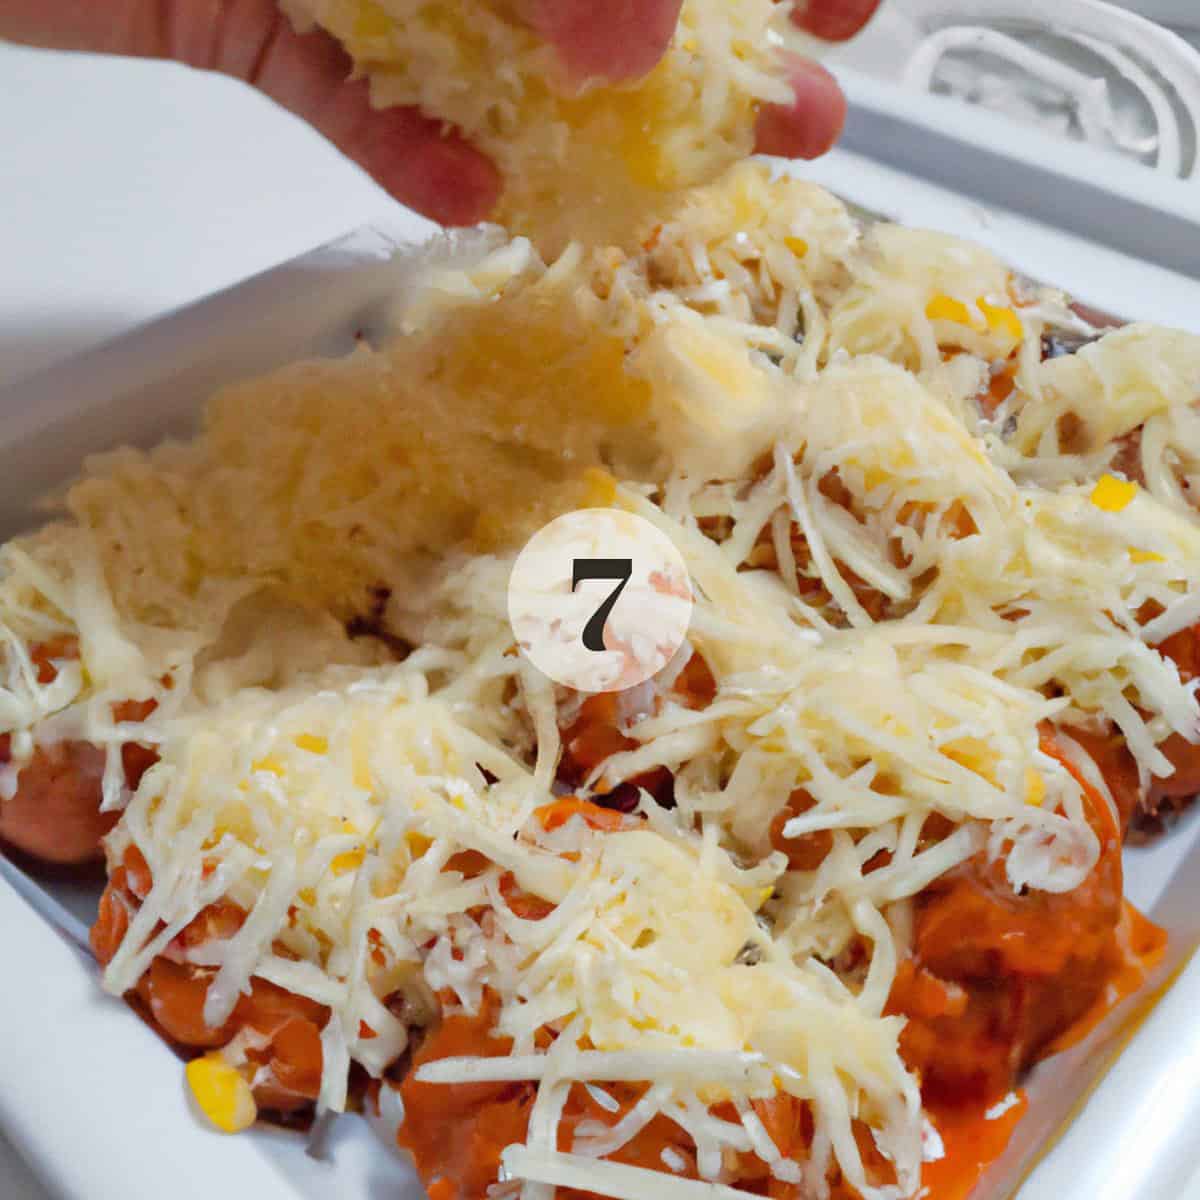 Adding shredded cheese to meatballs.